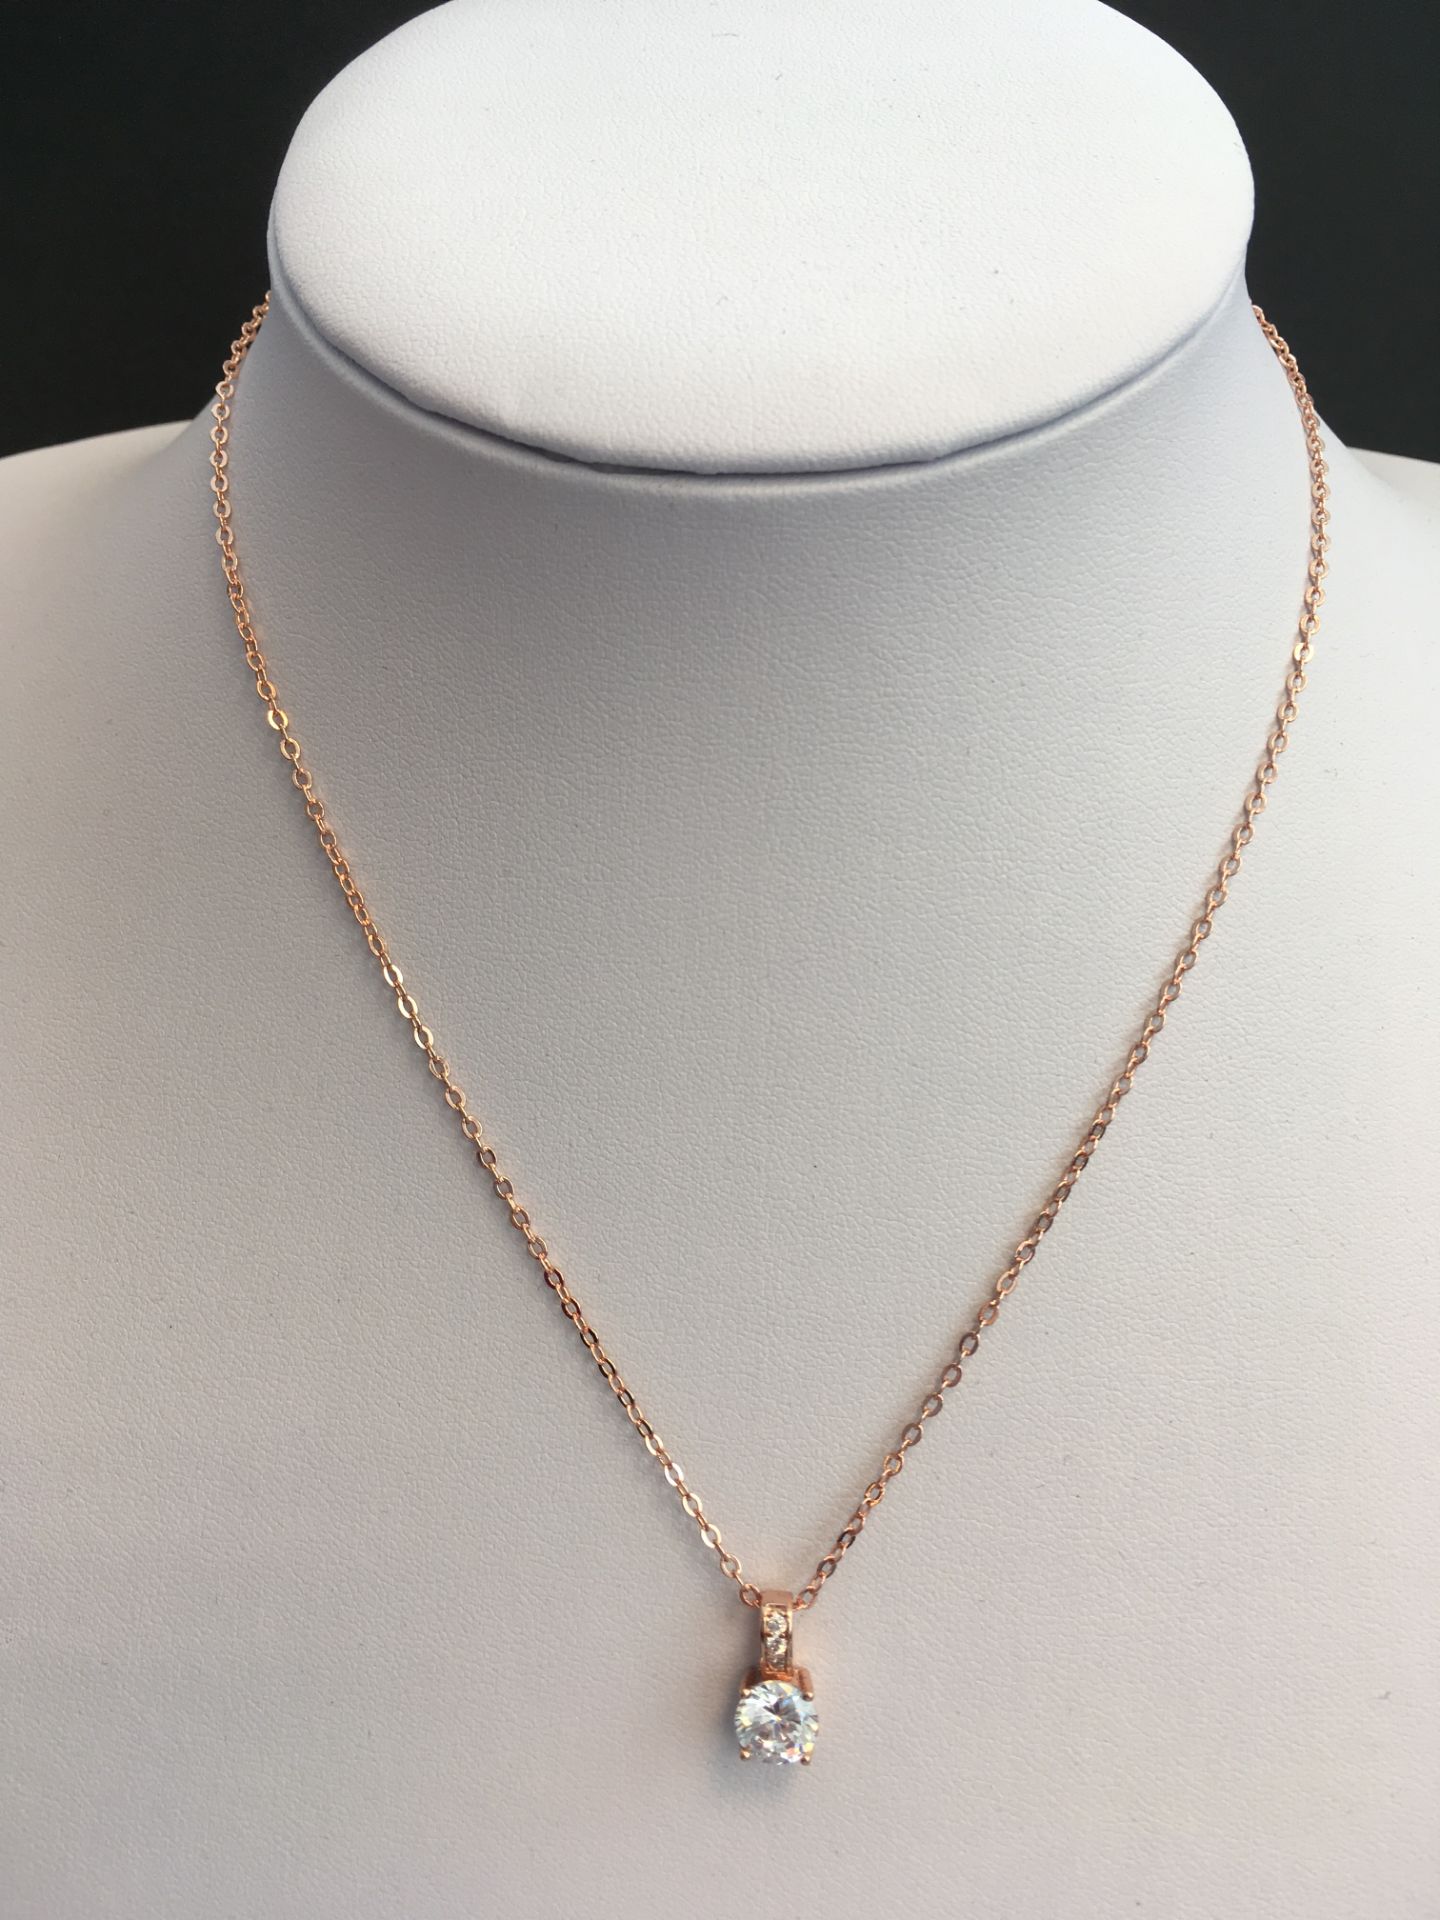 Rose Gold Plated, Three Piece, Necklace, Earring And Ring Set With Cubic Zirconia Stones - Image 3 of 4